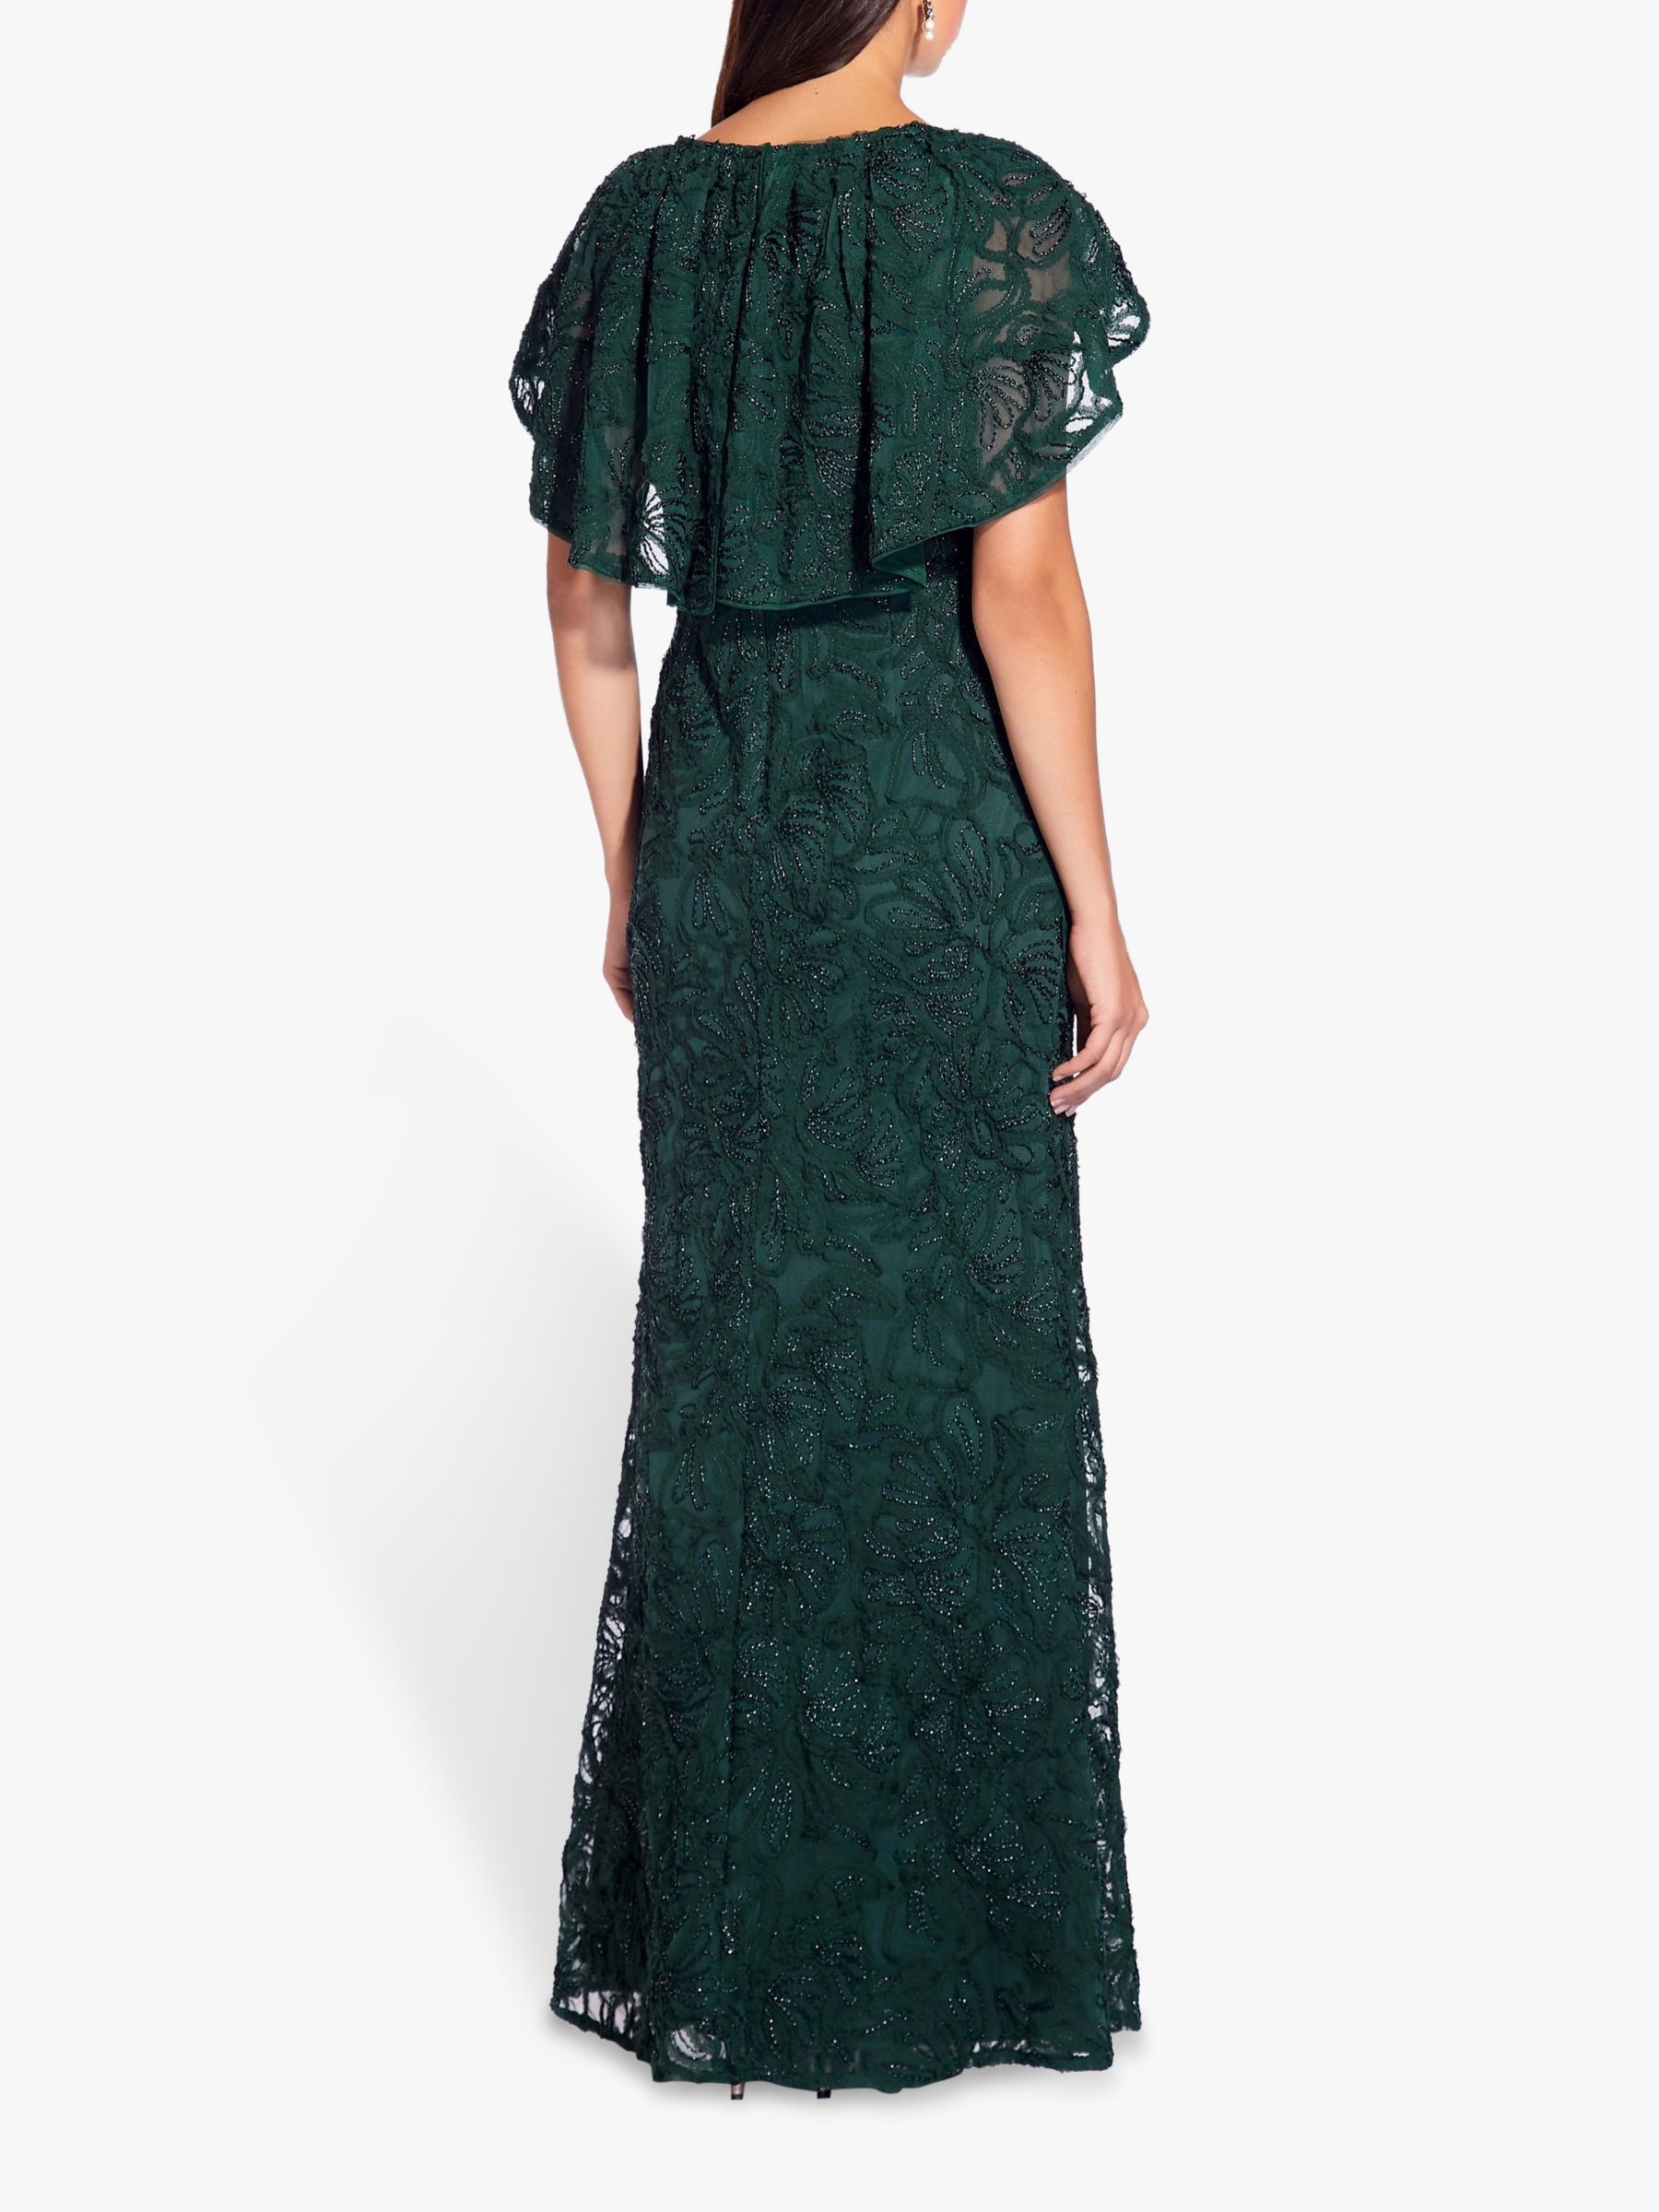 Adrianna Papell Soutache Embellished Dress, Dusty Emerald